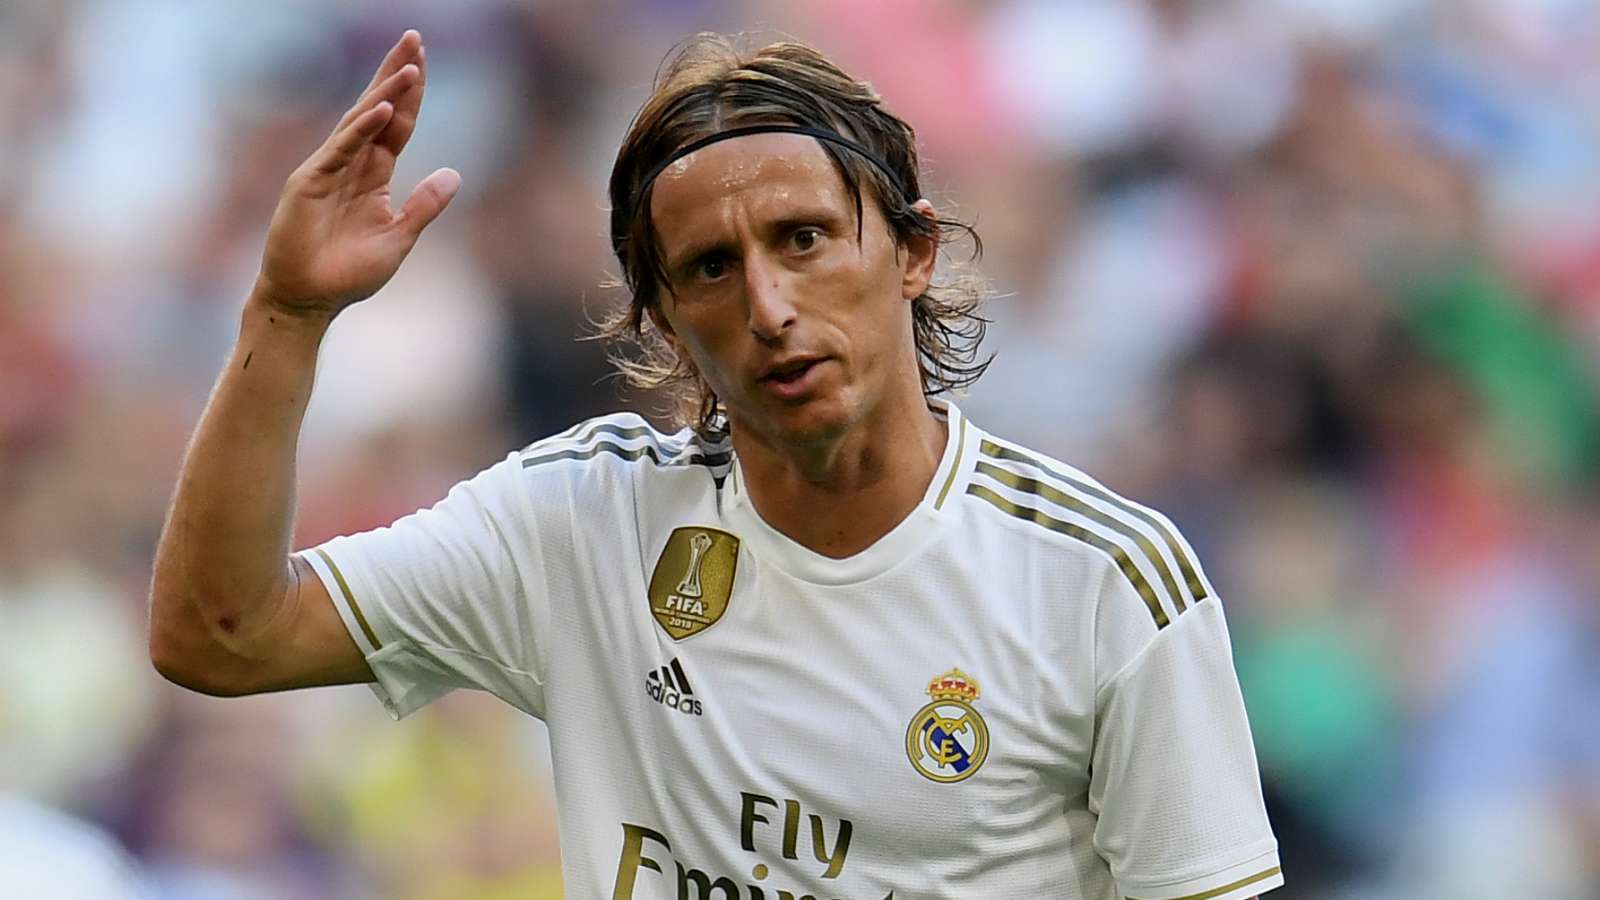 Modric adds to Real Madrid's injury woes with thigh problem - Bóng Đá